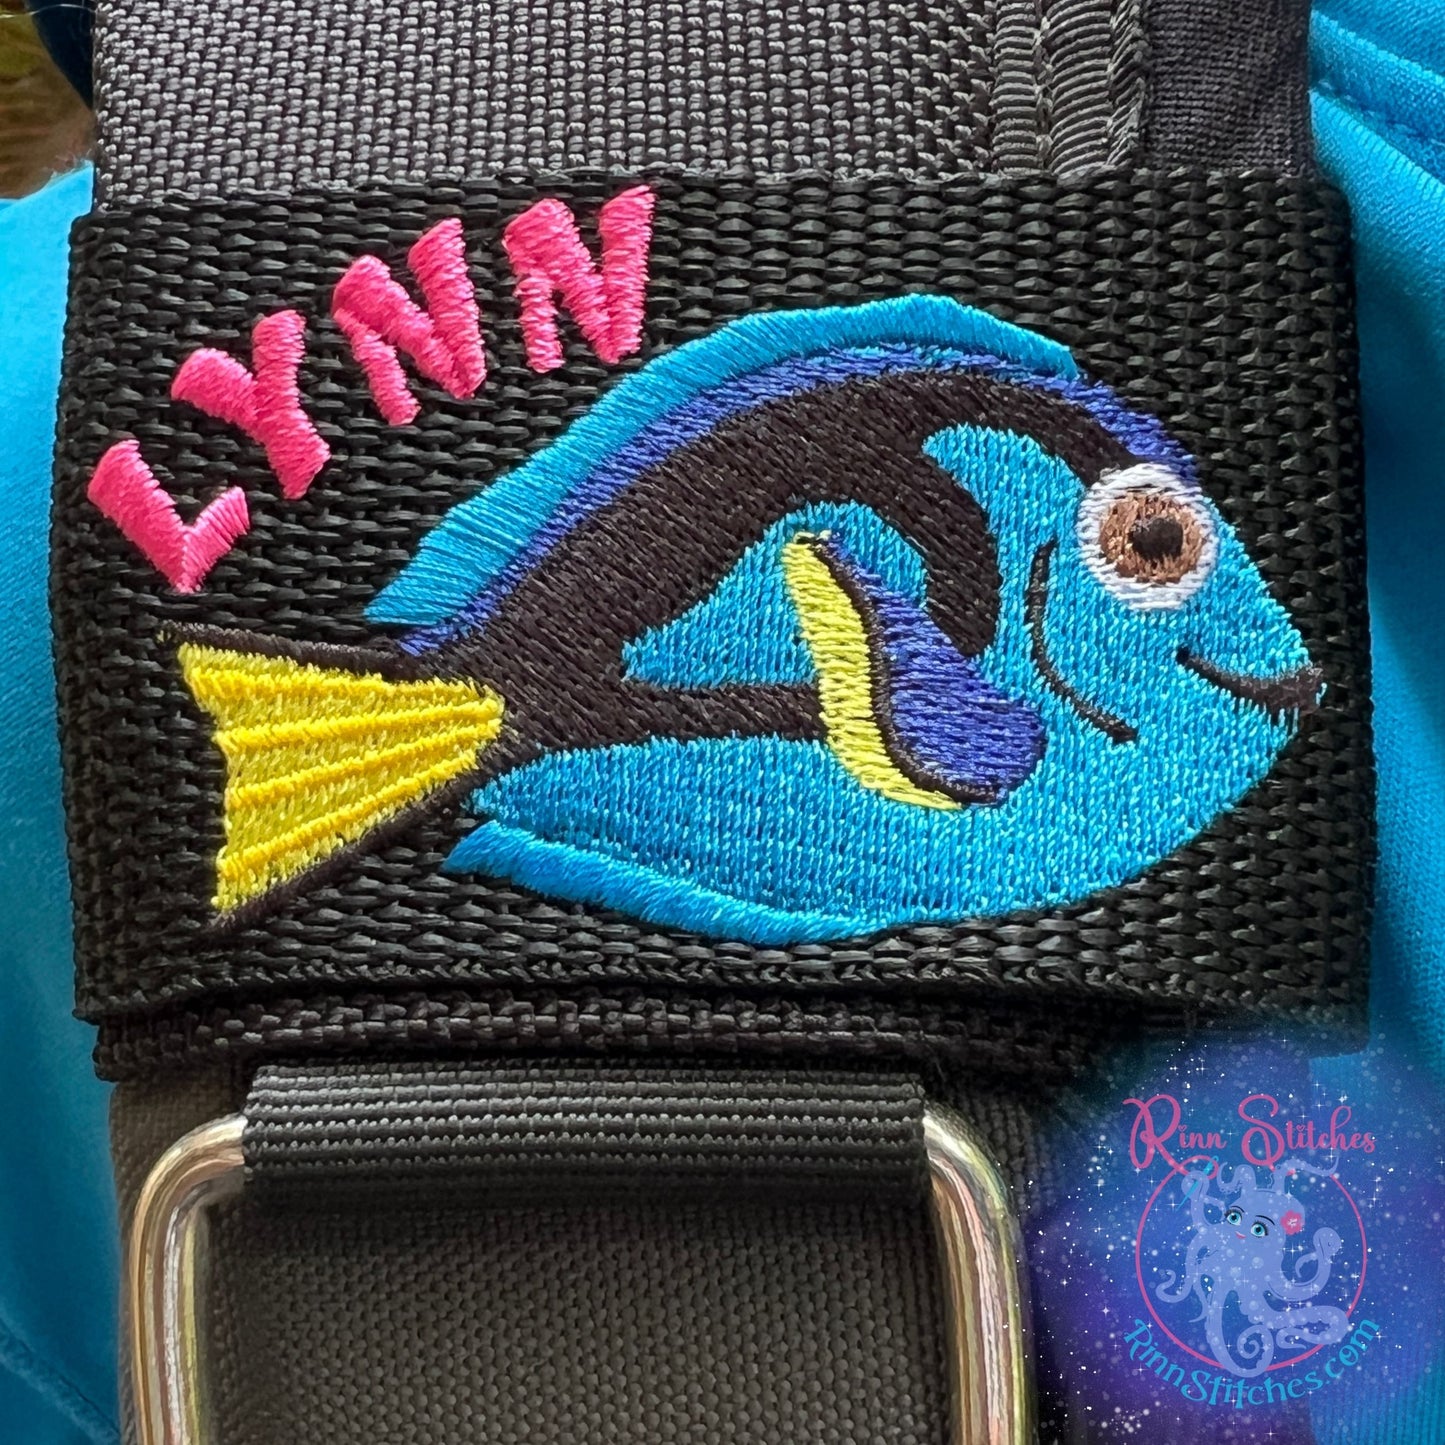 Blue Tang Tropical Fish Personalized & Customizable Scuba Diver BCD Identification Tag by Rinn Stitches on Maui, Hawaii